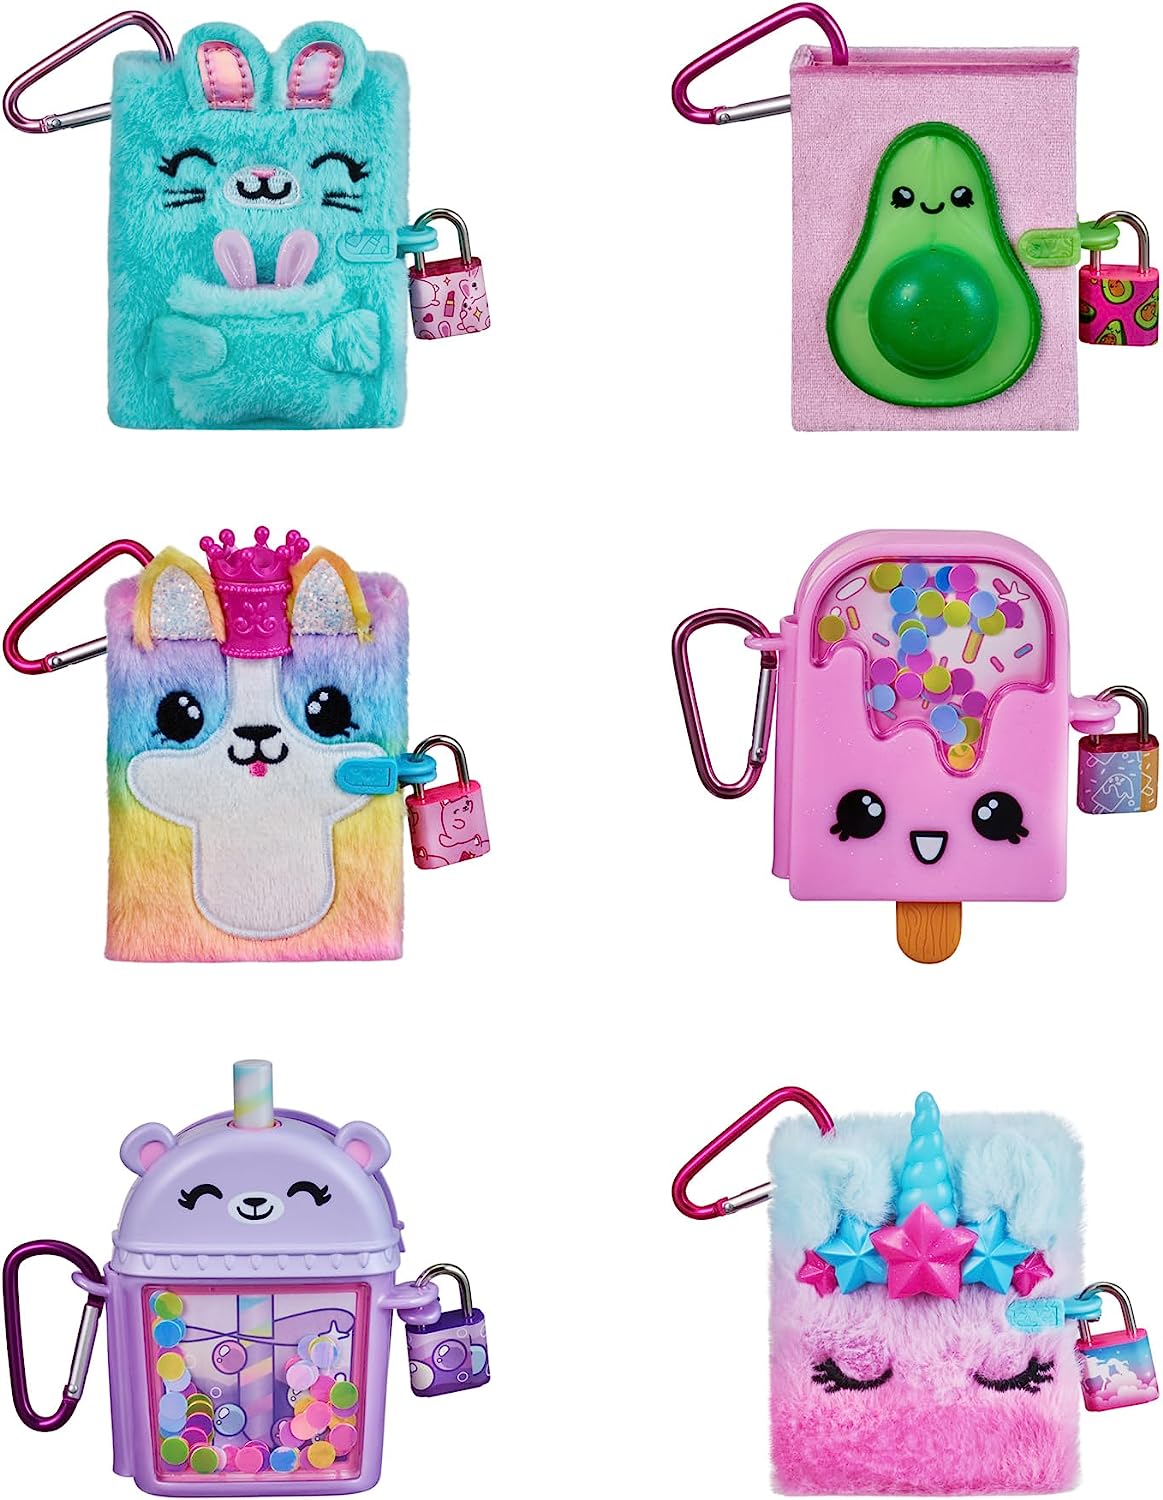  REAL LITTLES My Rainbow Collection, Roller Case, Fridge and  Locker Desk Caddies in One Pack! Plus 57 Mini Toy Surprises!